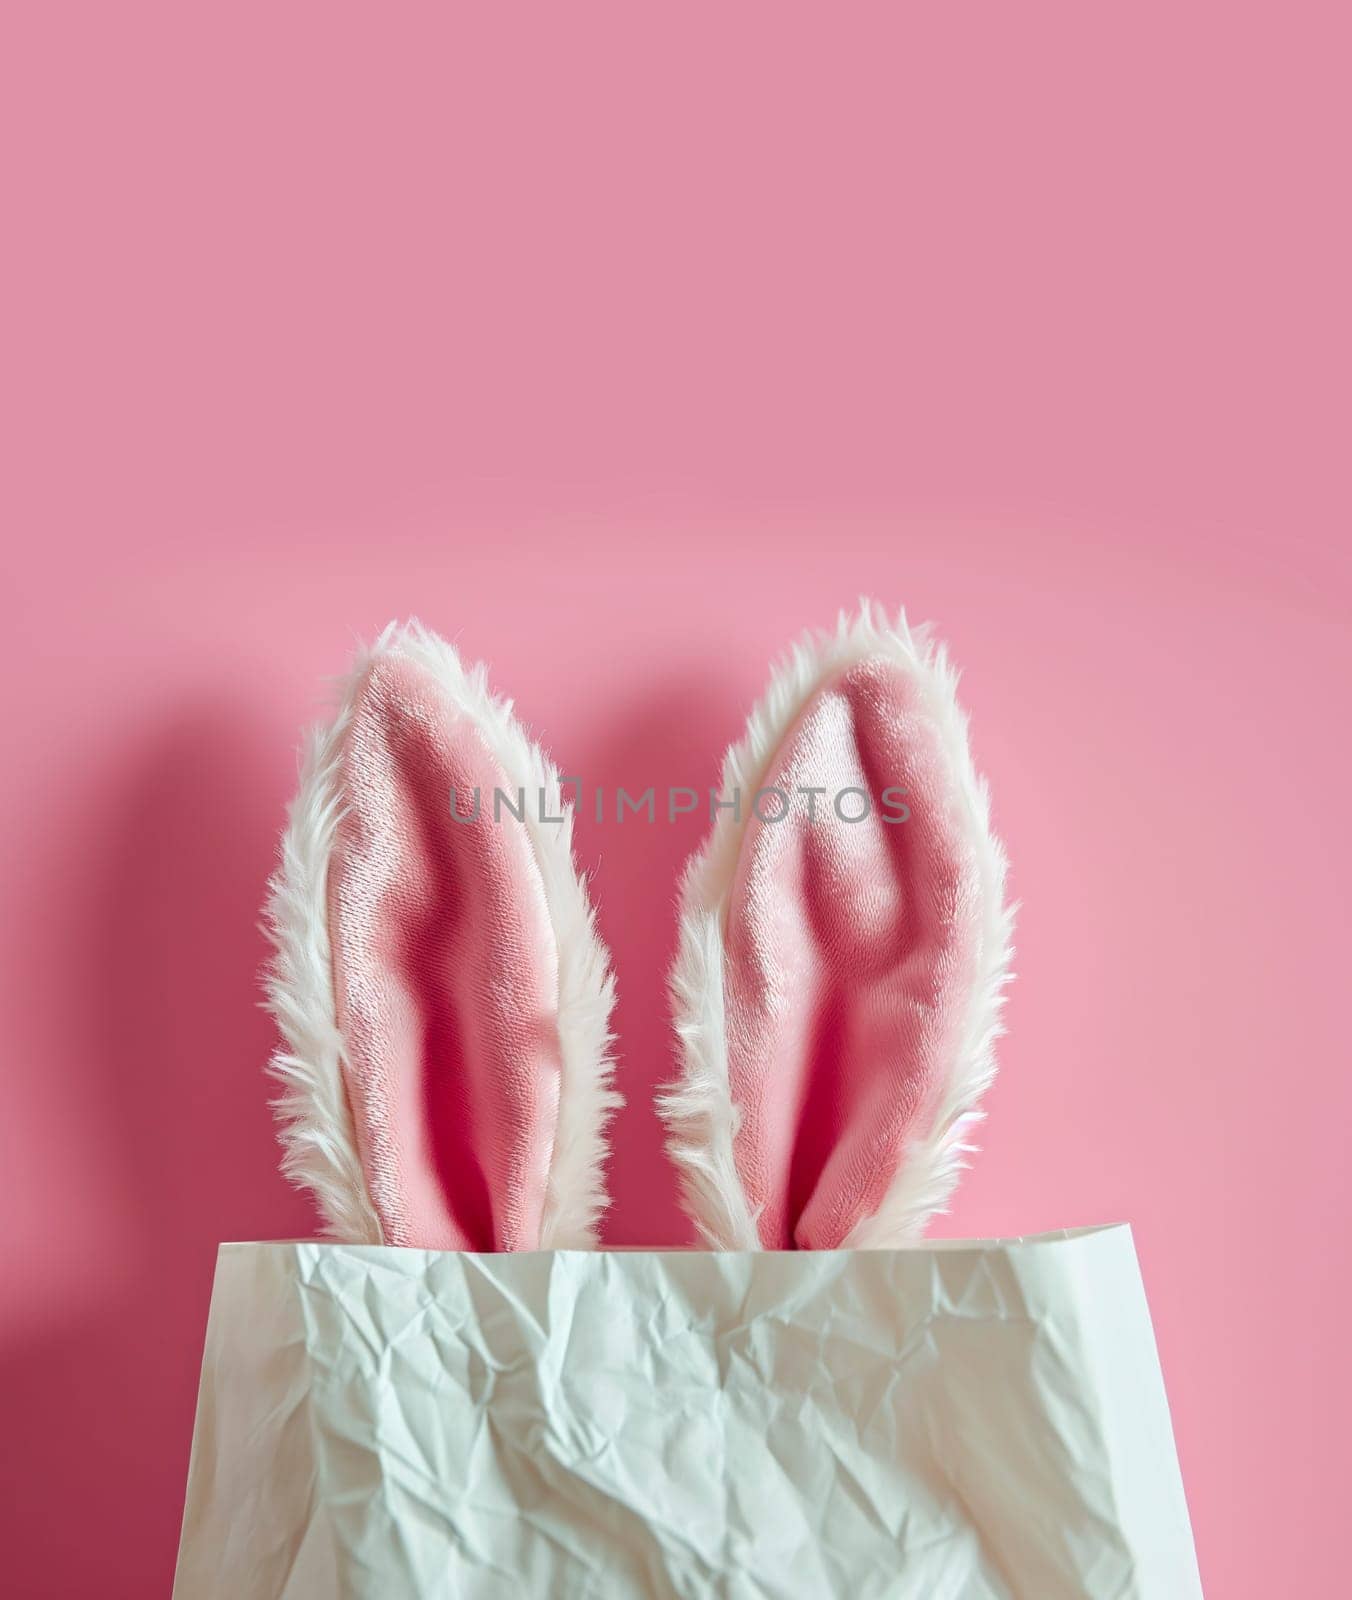 One beautiful velvet ears peeking out from a crumpled paper bag standing from below on a pink background with copy space from above, close-up side view.